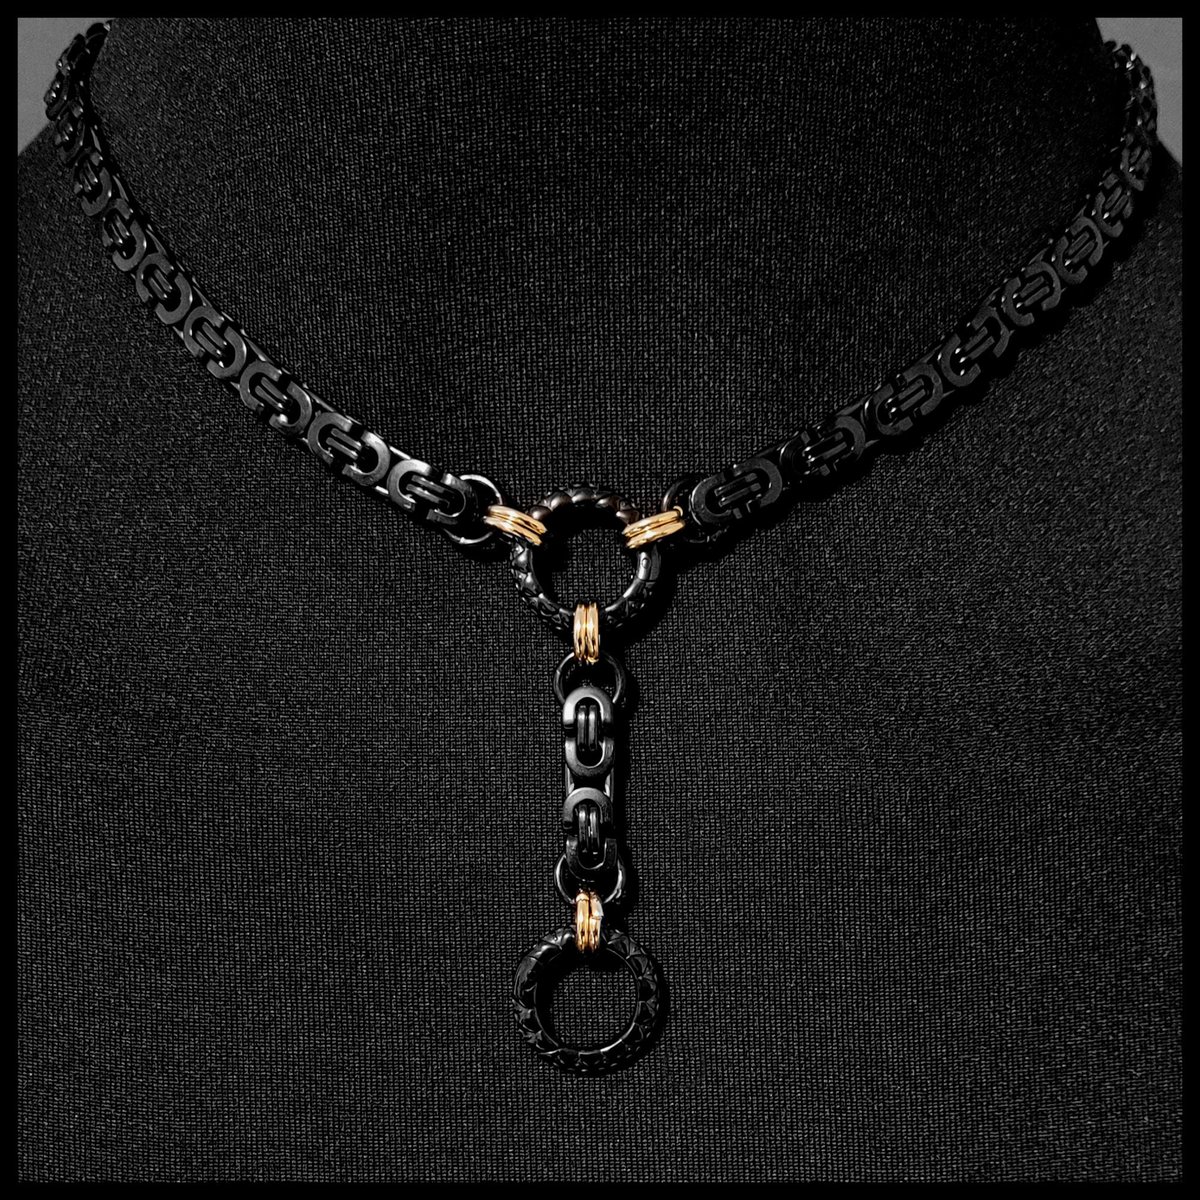 #borobudur #StainlessSteel Midnight Golden Passion Locking Discreet Day Collar and Drop Chain w/Black Stainless Steel Byzantine Chain & Lobster Clasp Behind Neck
$155.00
Get here etsy.com/listing/166193…